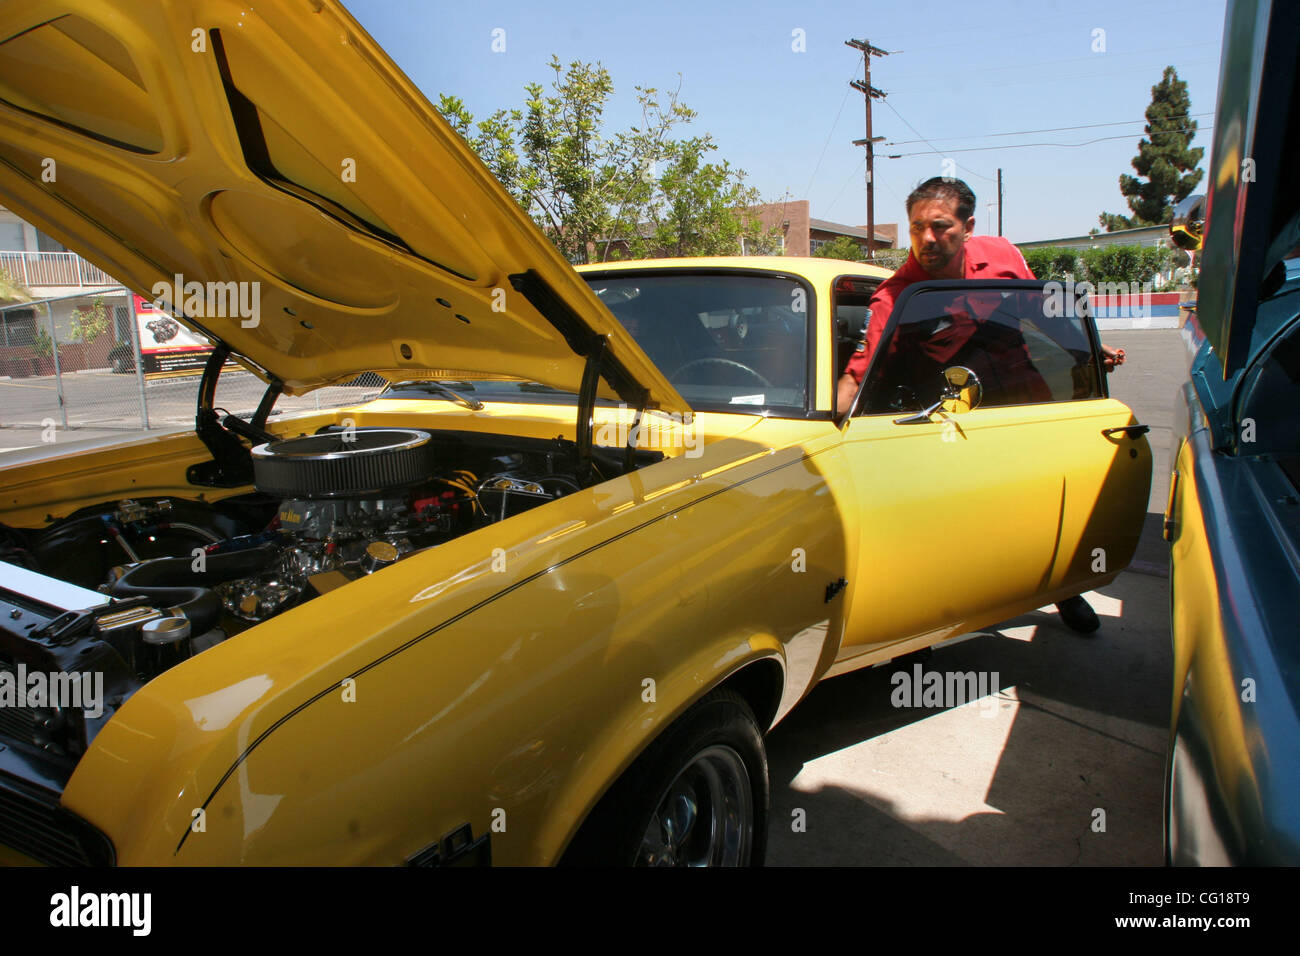 July 30, 2007 Carlsbad, CA, GEORGE GONZALEZ worked on his 1973 Chevy Nova,  getting it ready for the ROD RUN 18 and car show in Vista Sunday August  5th. Mandatory Credit: Photo